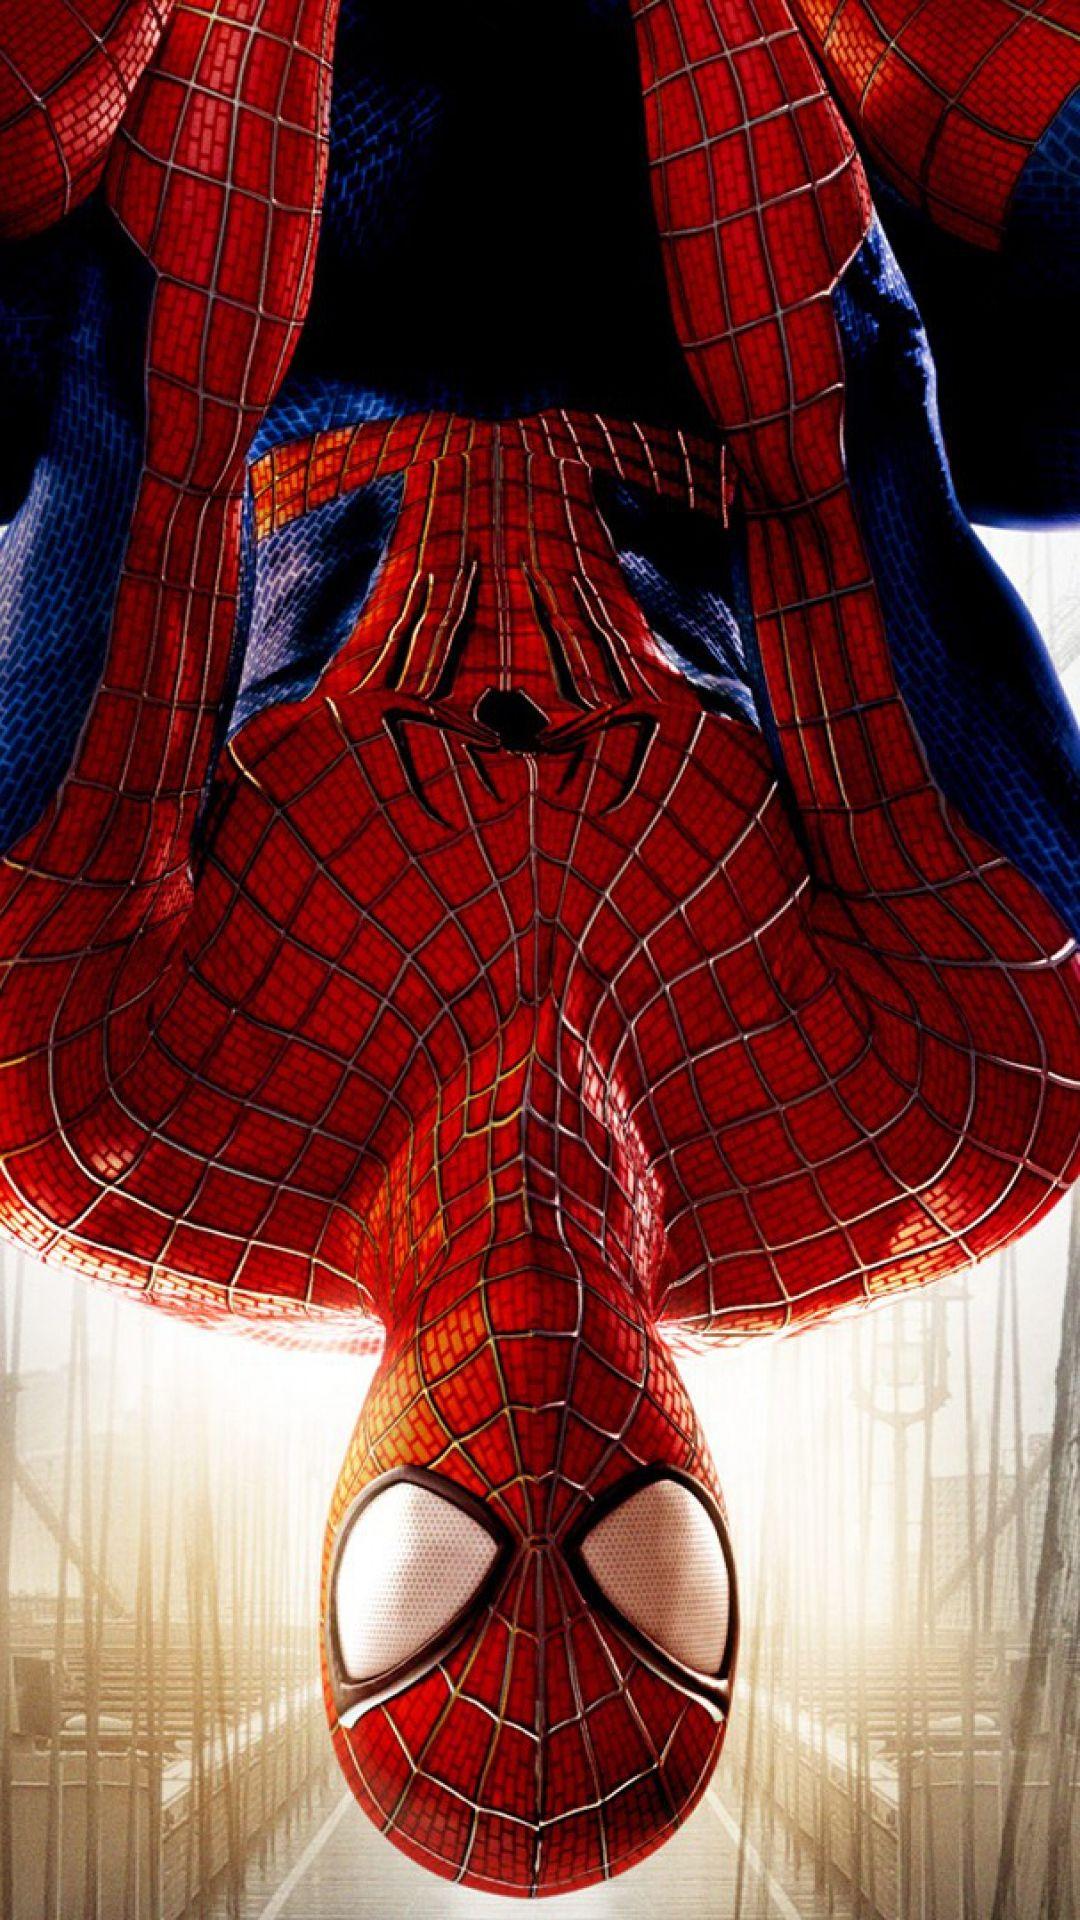 Spiderman Image for iPhone HD